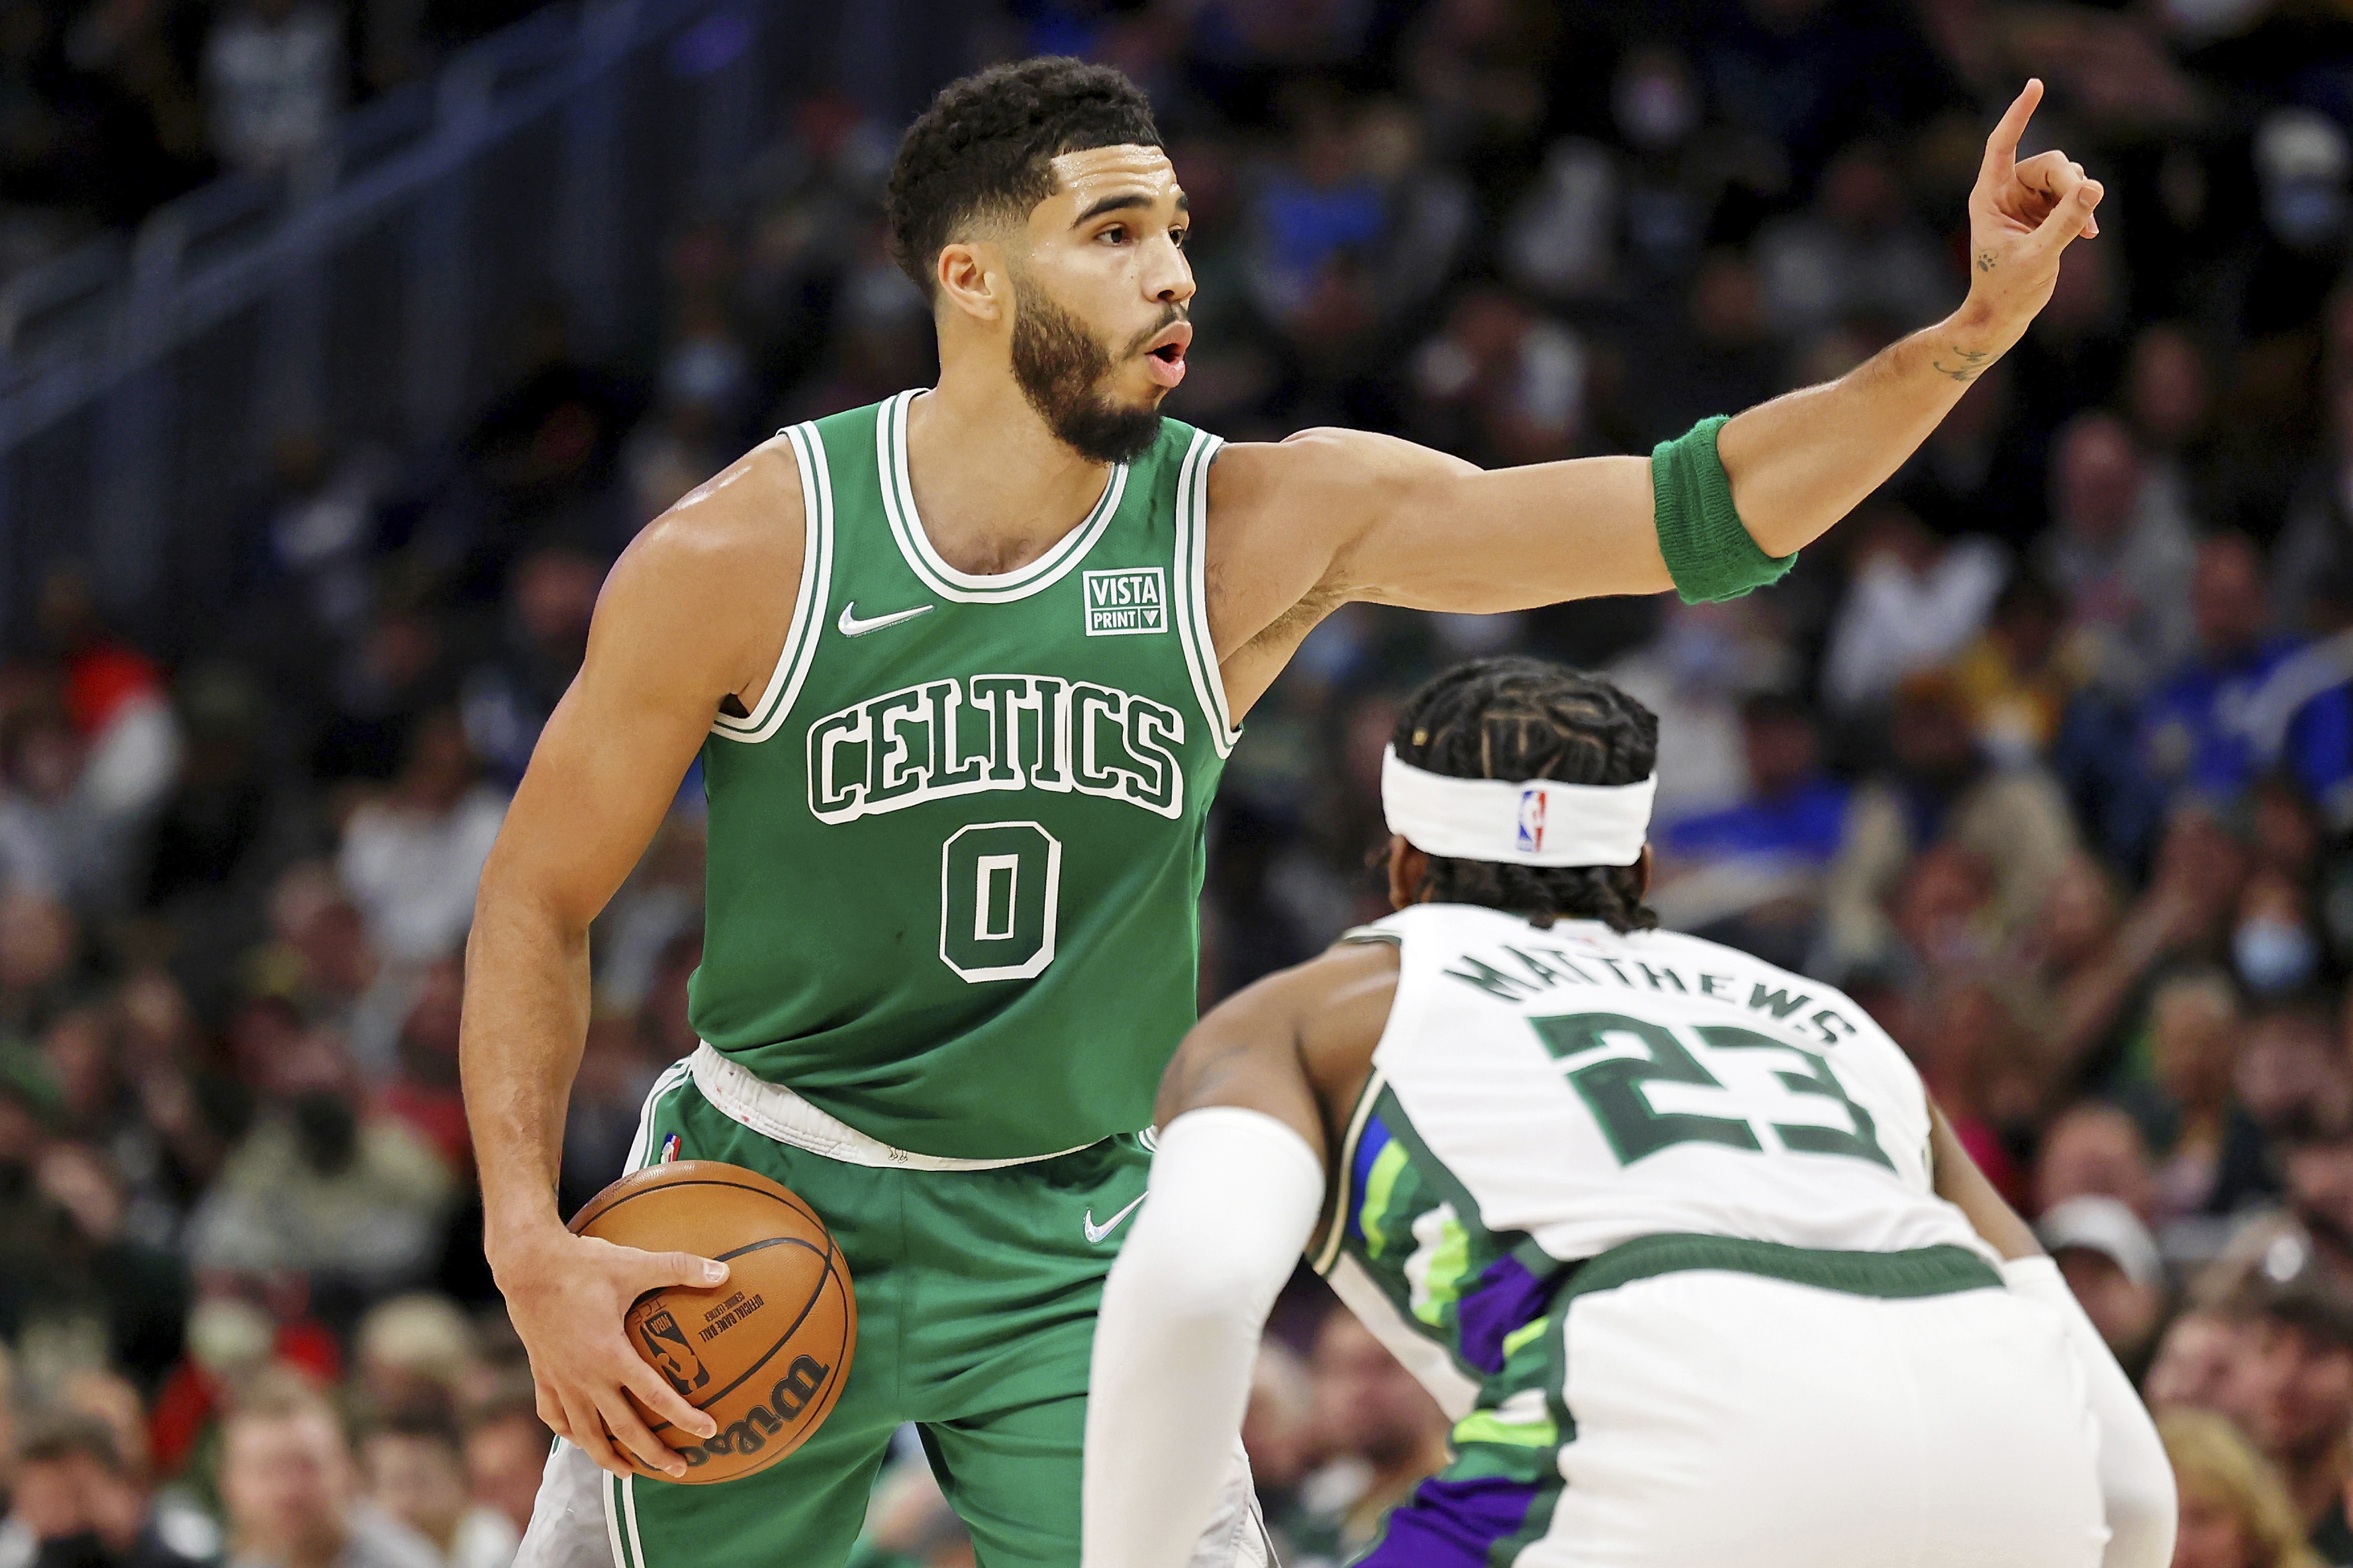 Here's what the Jayson Tatum, the Celtics said about COVID-19 vaccine